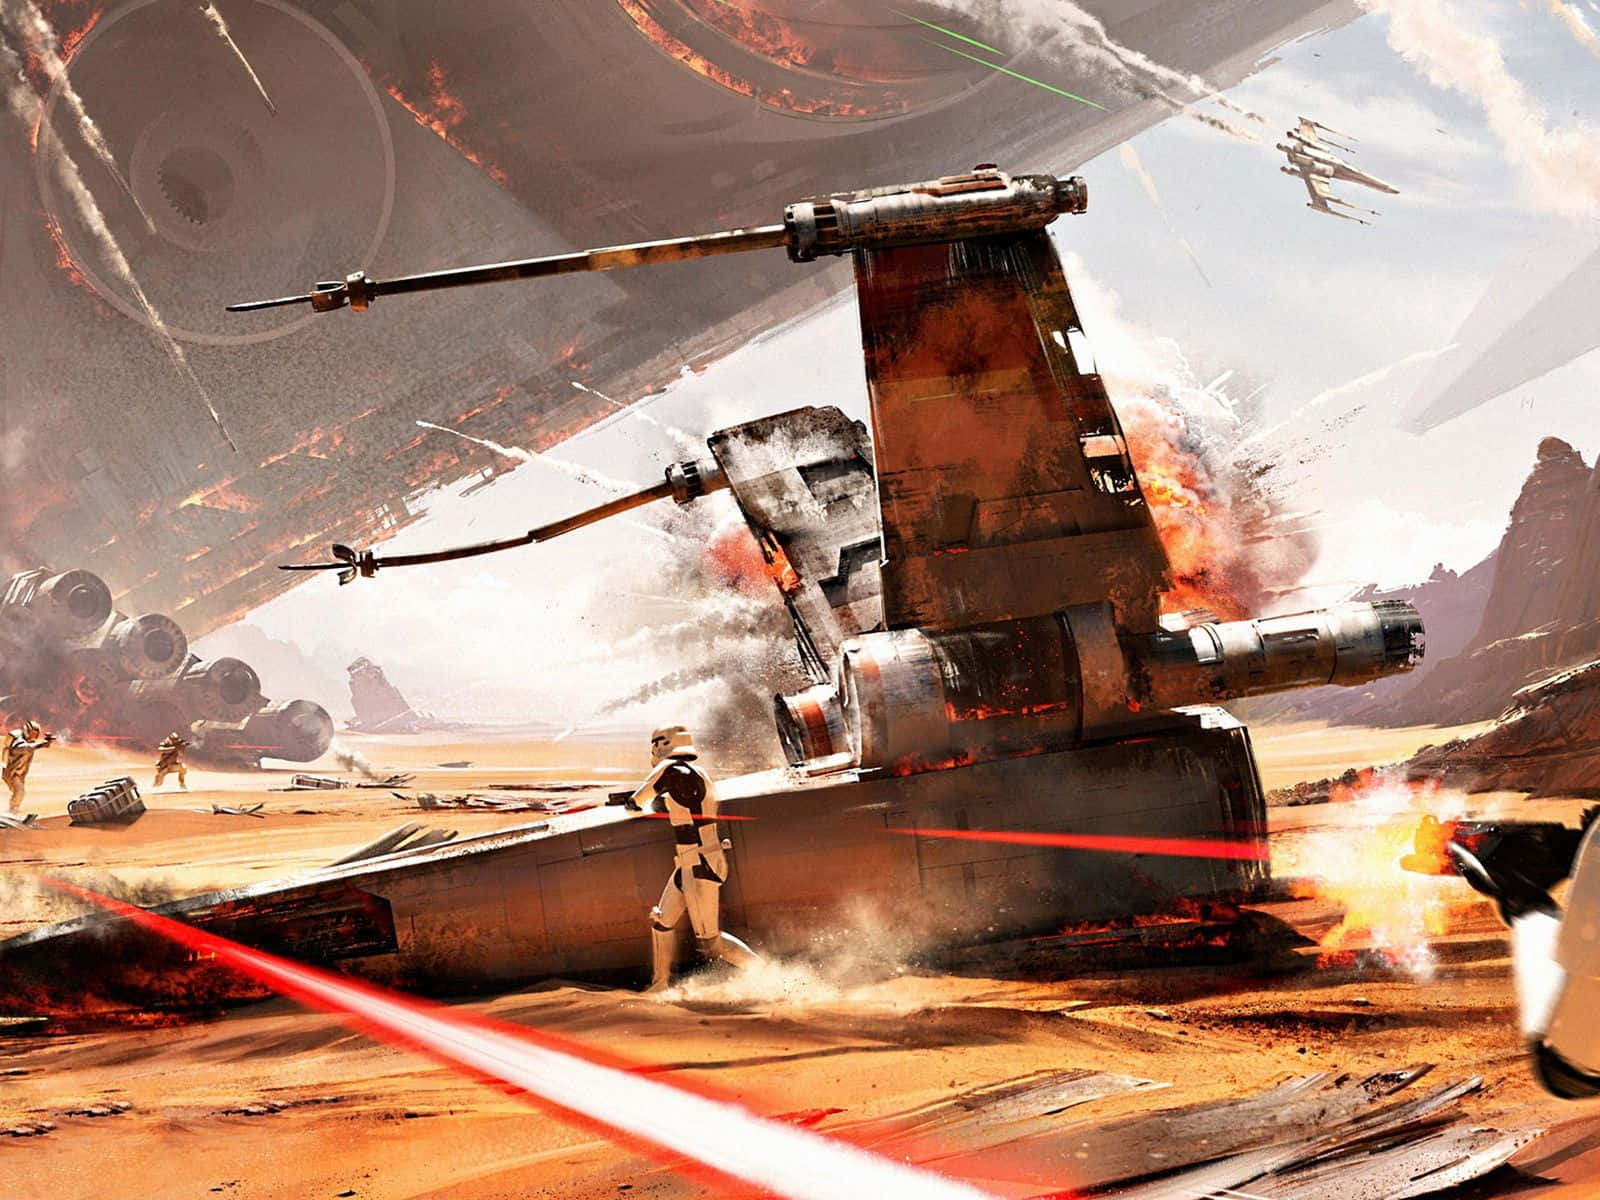 Witness the height of the galactic conflict in Star Wars: The Battle of Jakku." Wallpaper